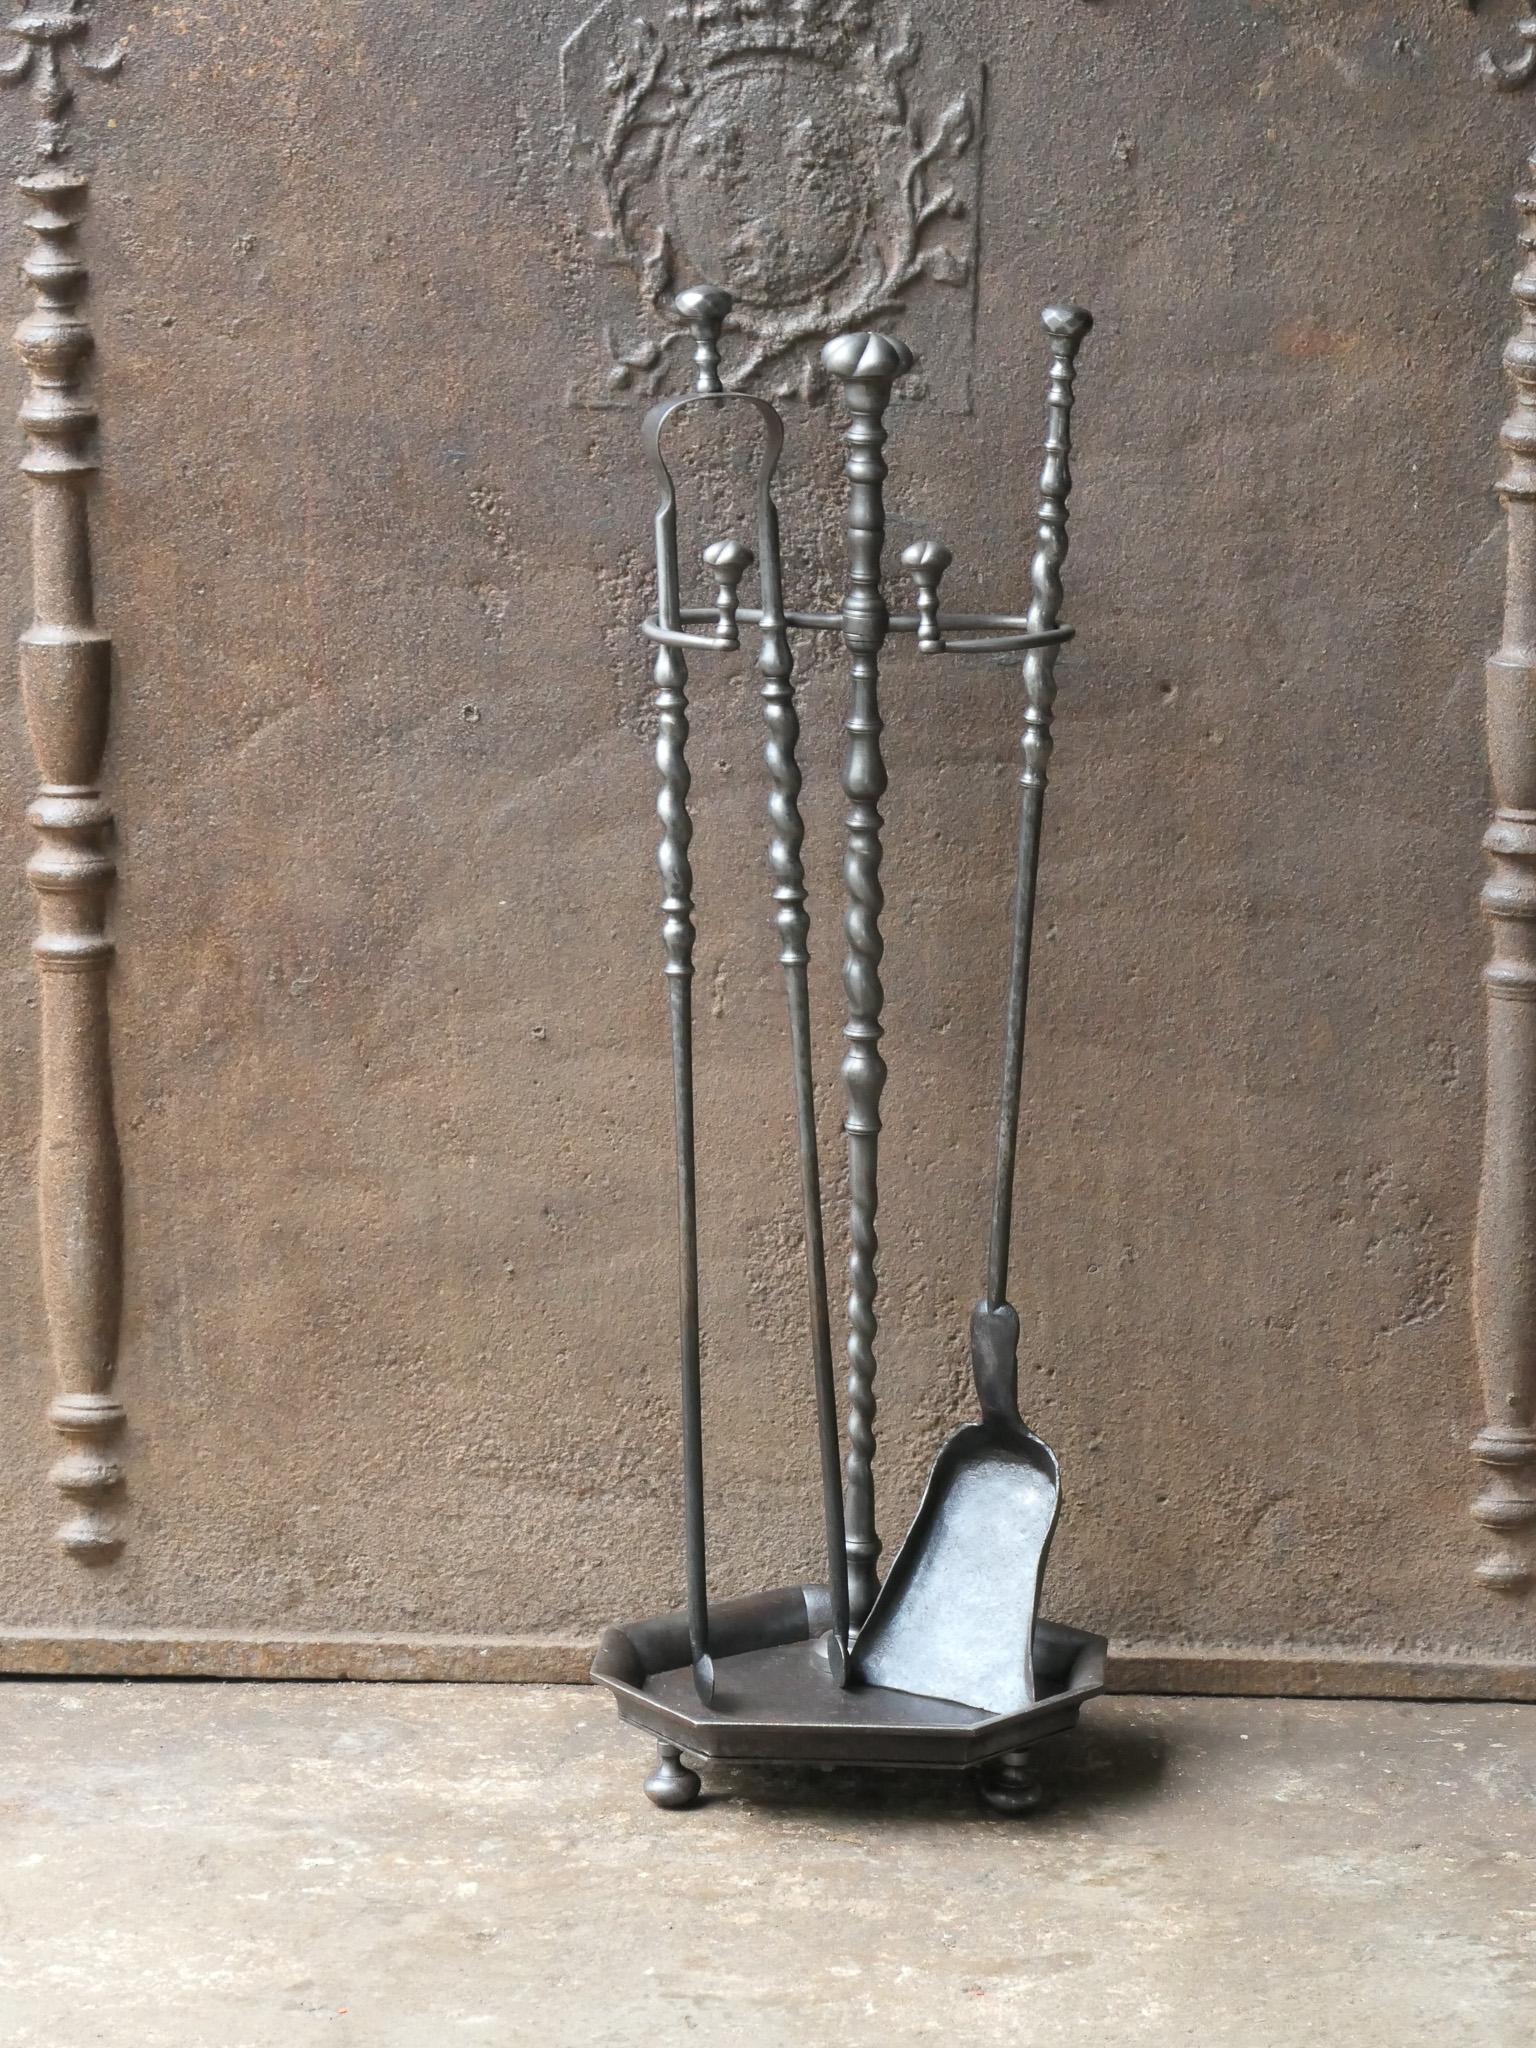 19th century French fireplace tool set. Napoleon III period. The tool set consists of tongs, shovel, and a stand. The tools are made of wrought iron and the stand of cast iron. The set is in a good condition and fit for use in the fireplace.